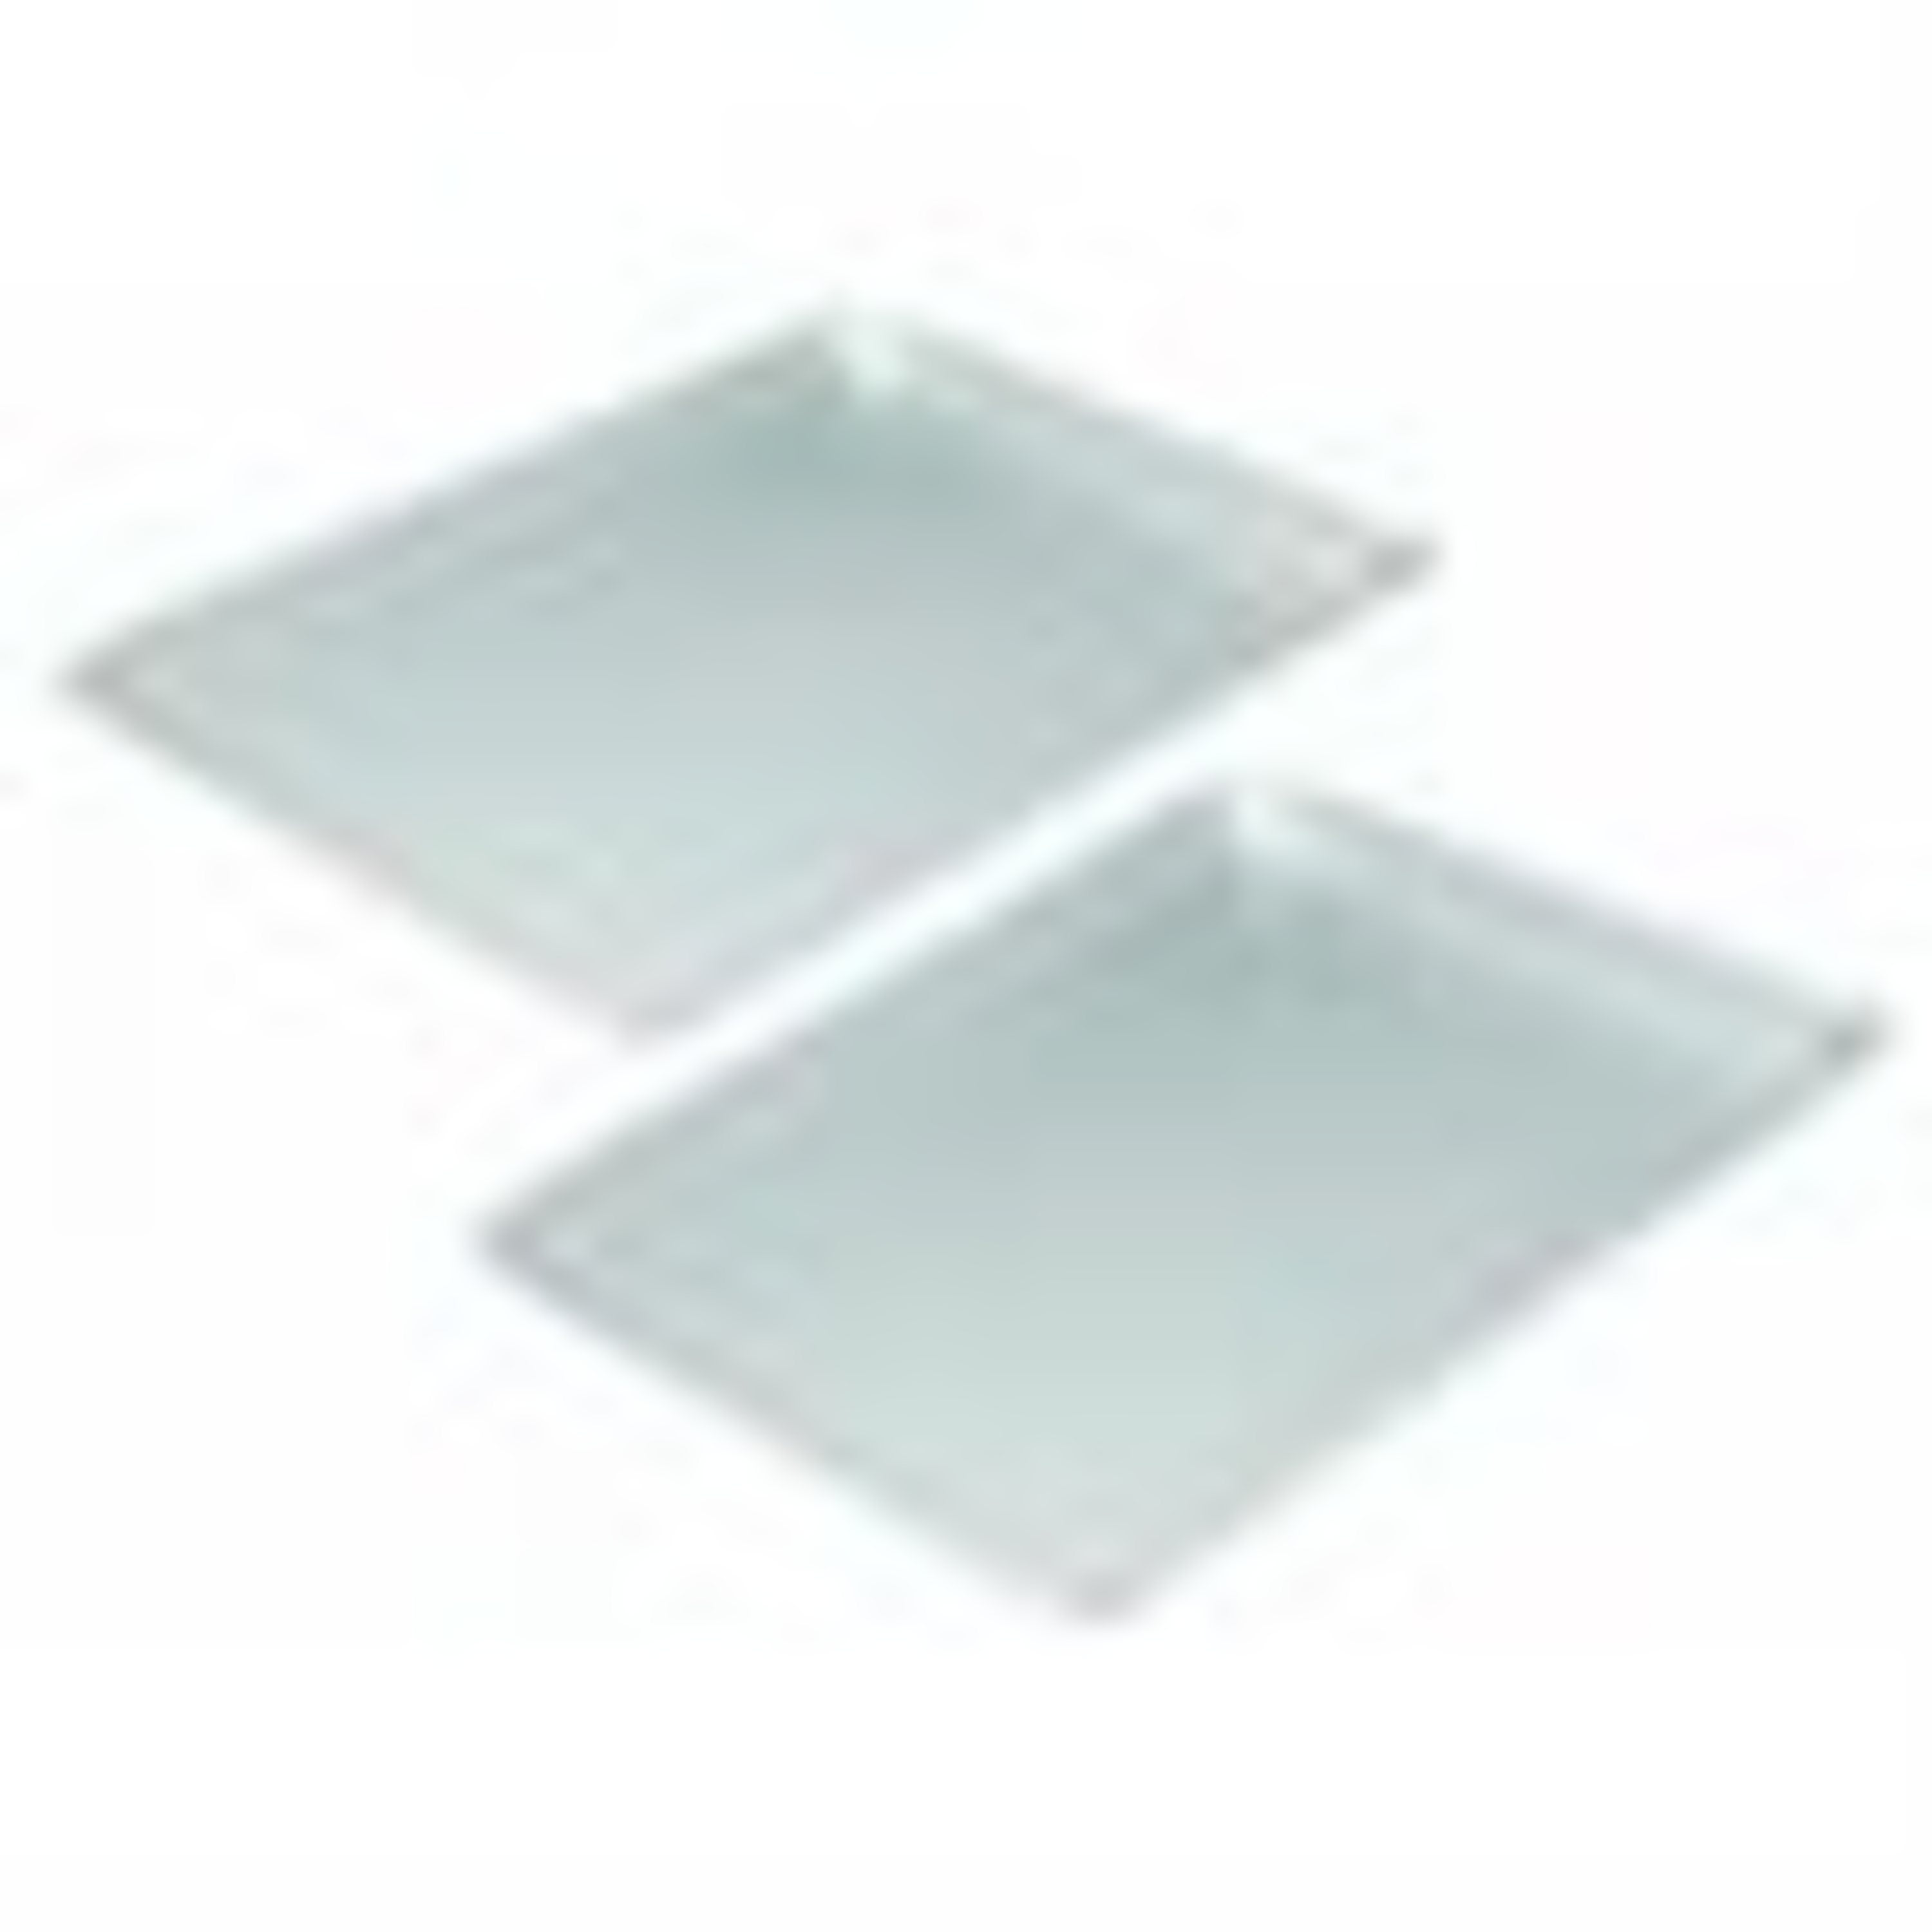 Chicago Metallic 12 In. W X 16-3/4 In. L Cookie And Jelly Roll Pan